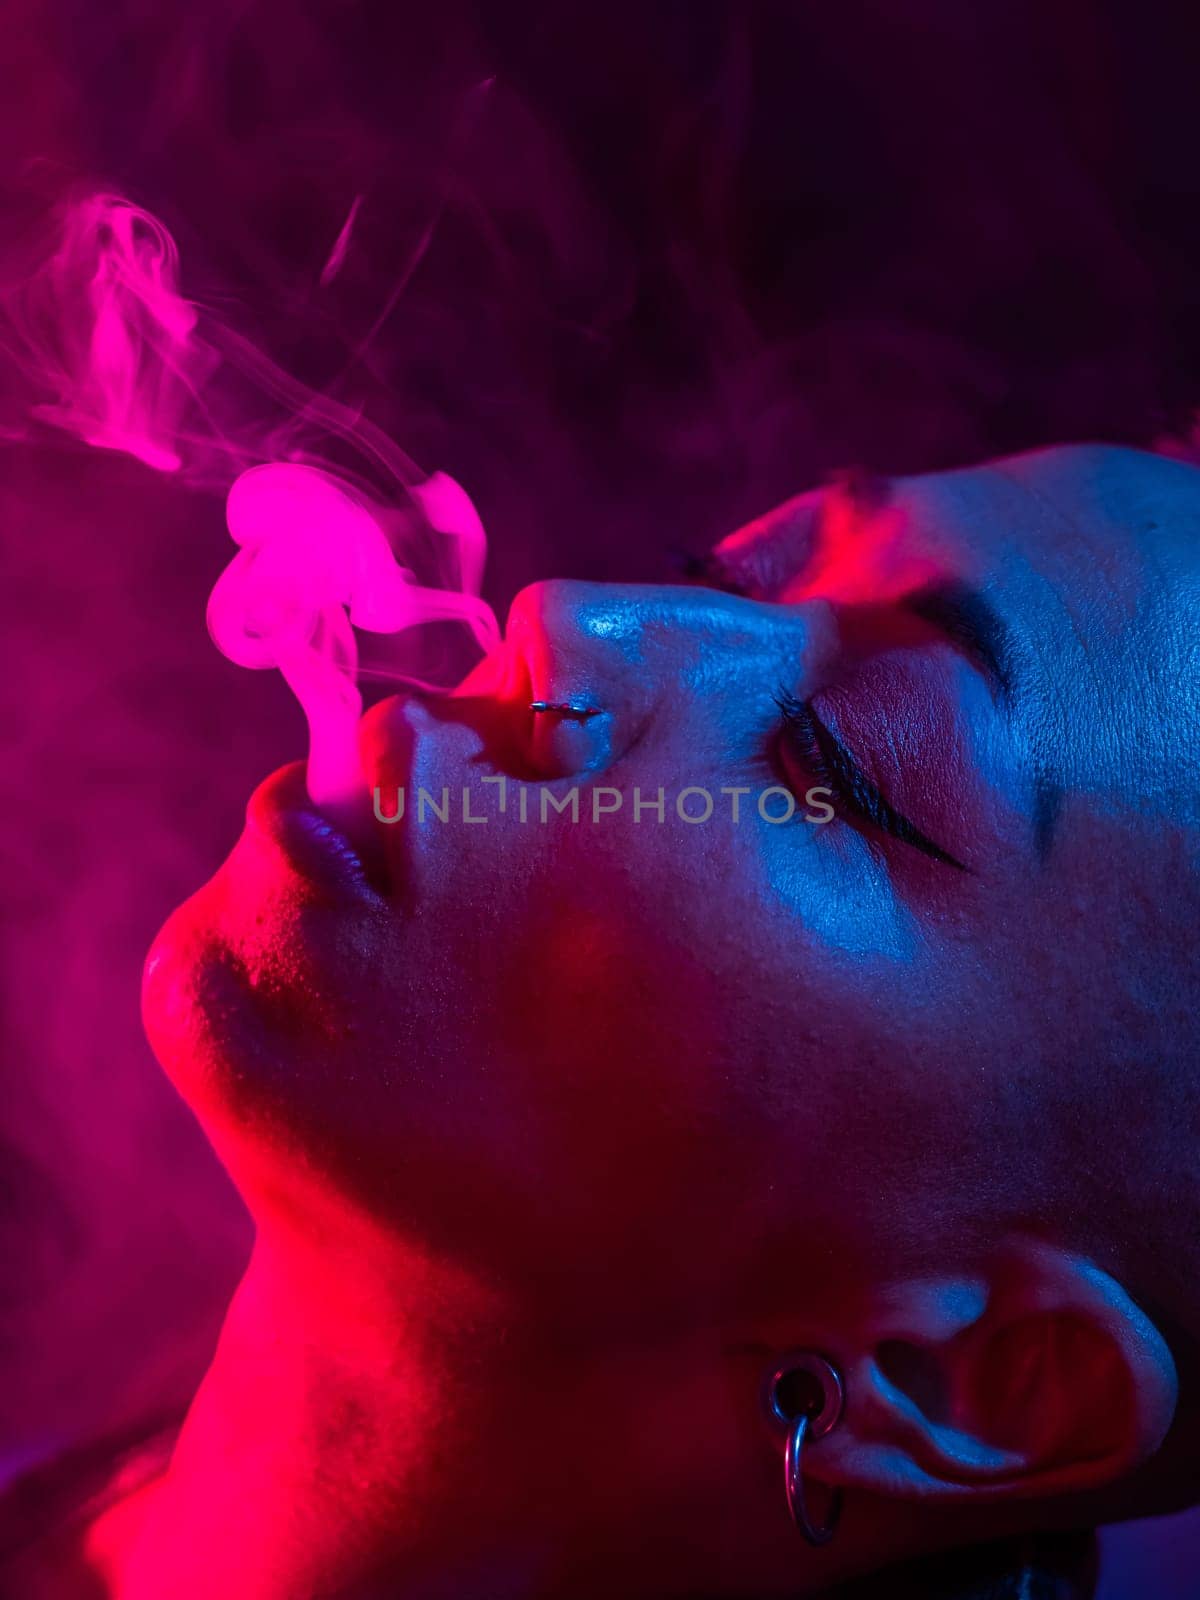 Asian woman with short haircut smoking in neon light. close-up portrait. by mrwed54